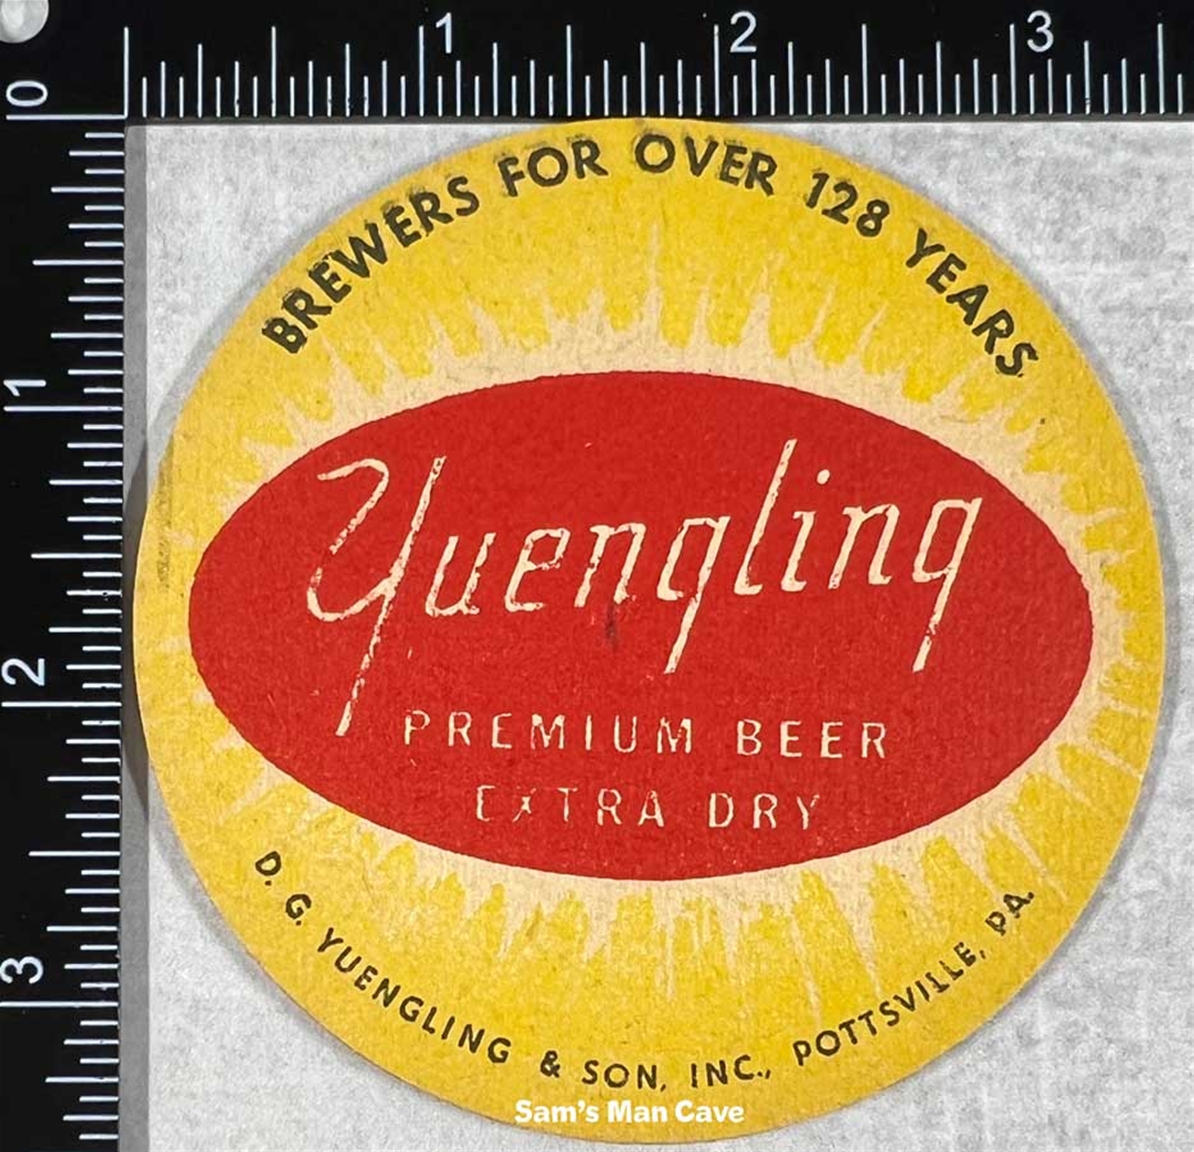 Yuengling Over 128 Years Beer Coaster